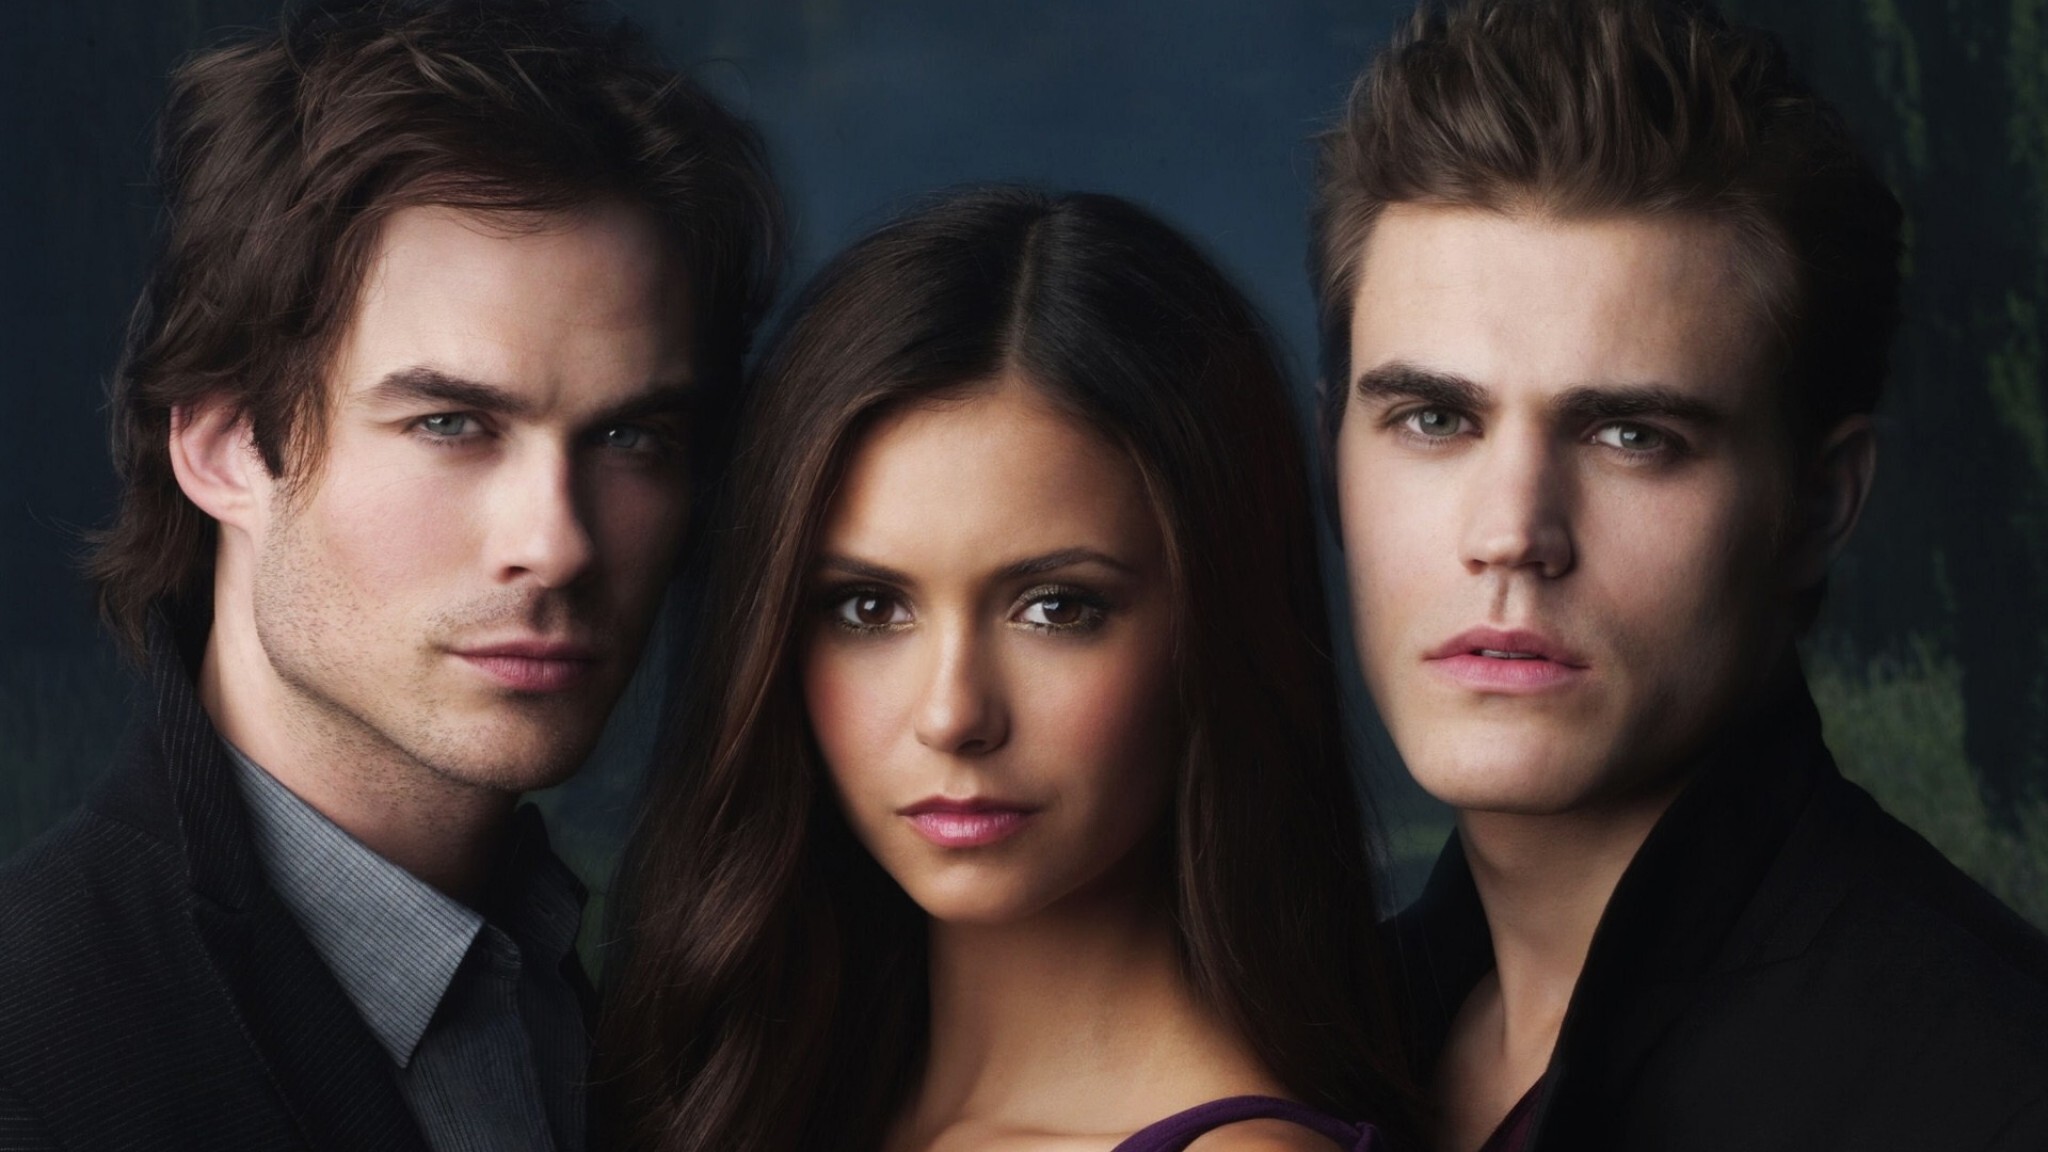 The Vampire Diaries (TV Series): Leading Trio Of Actors, The CW Chanel, CBS Television Studios. 2050x1160 HD Background.